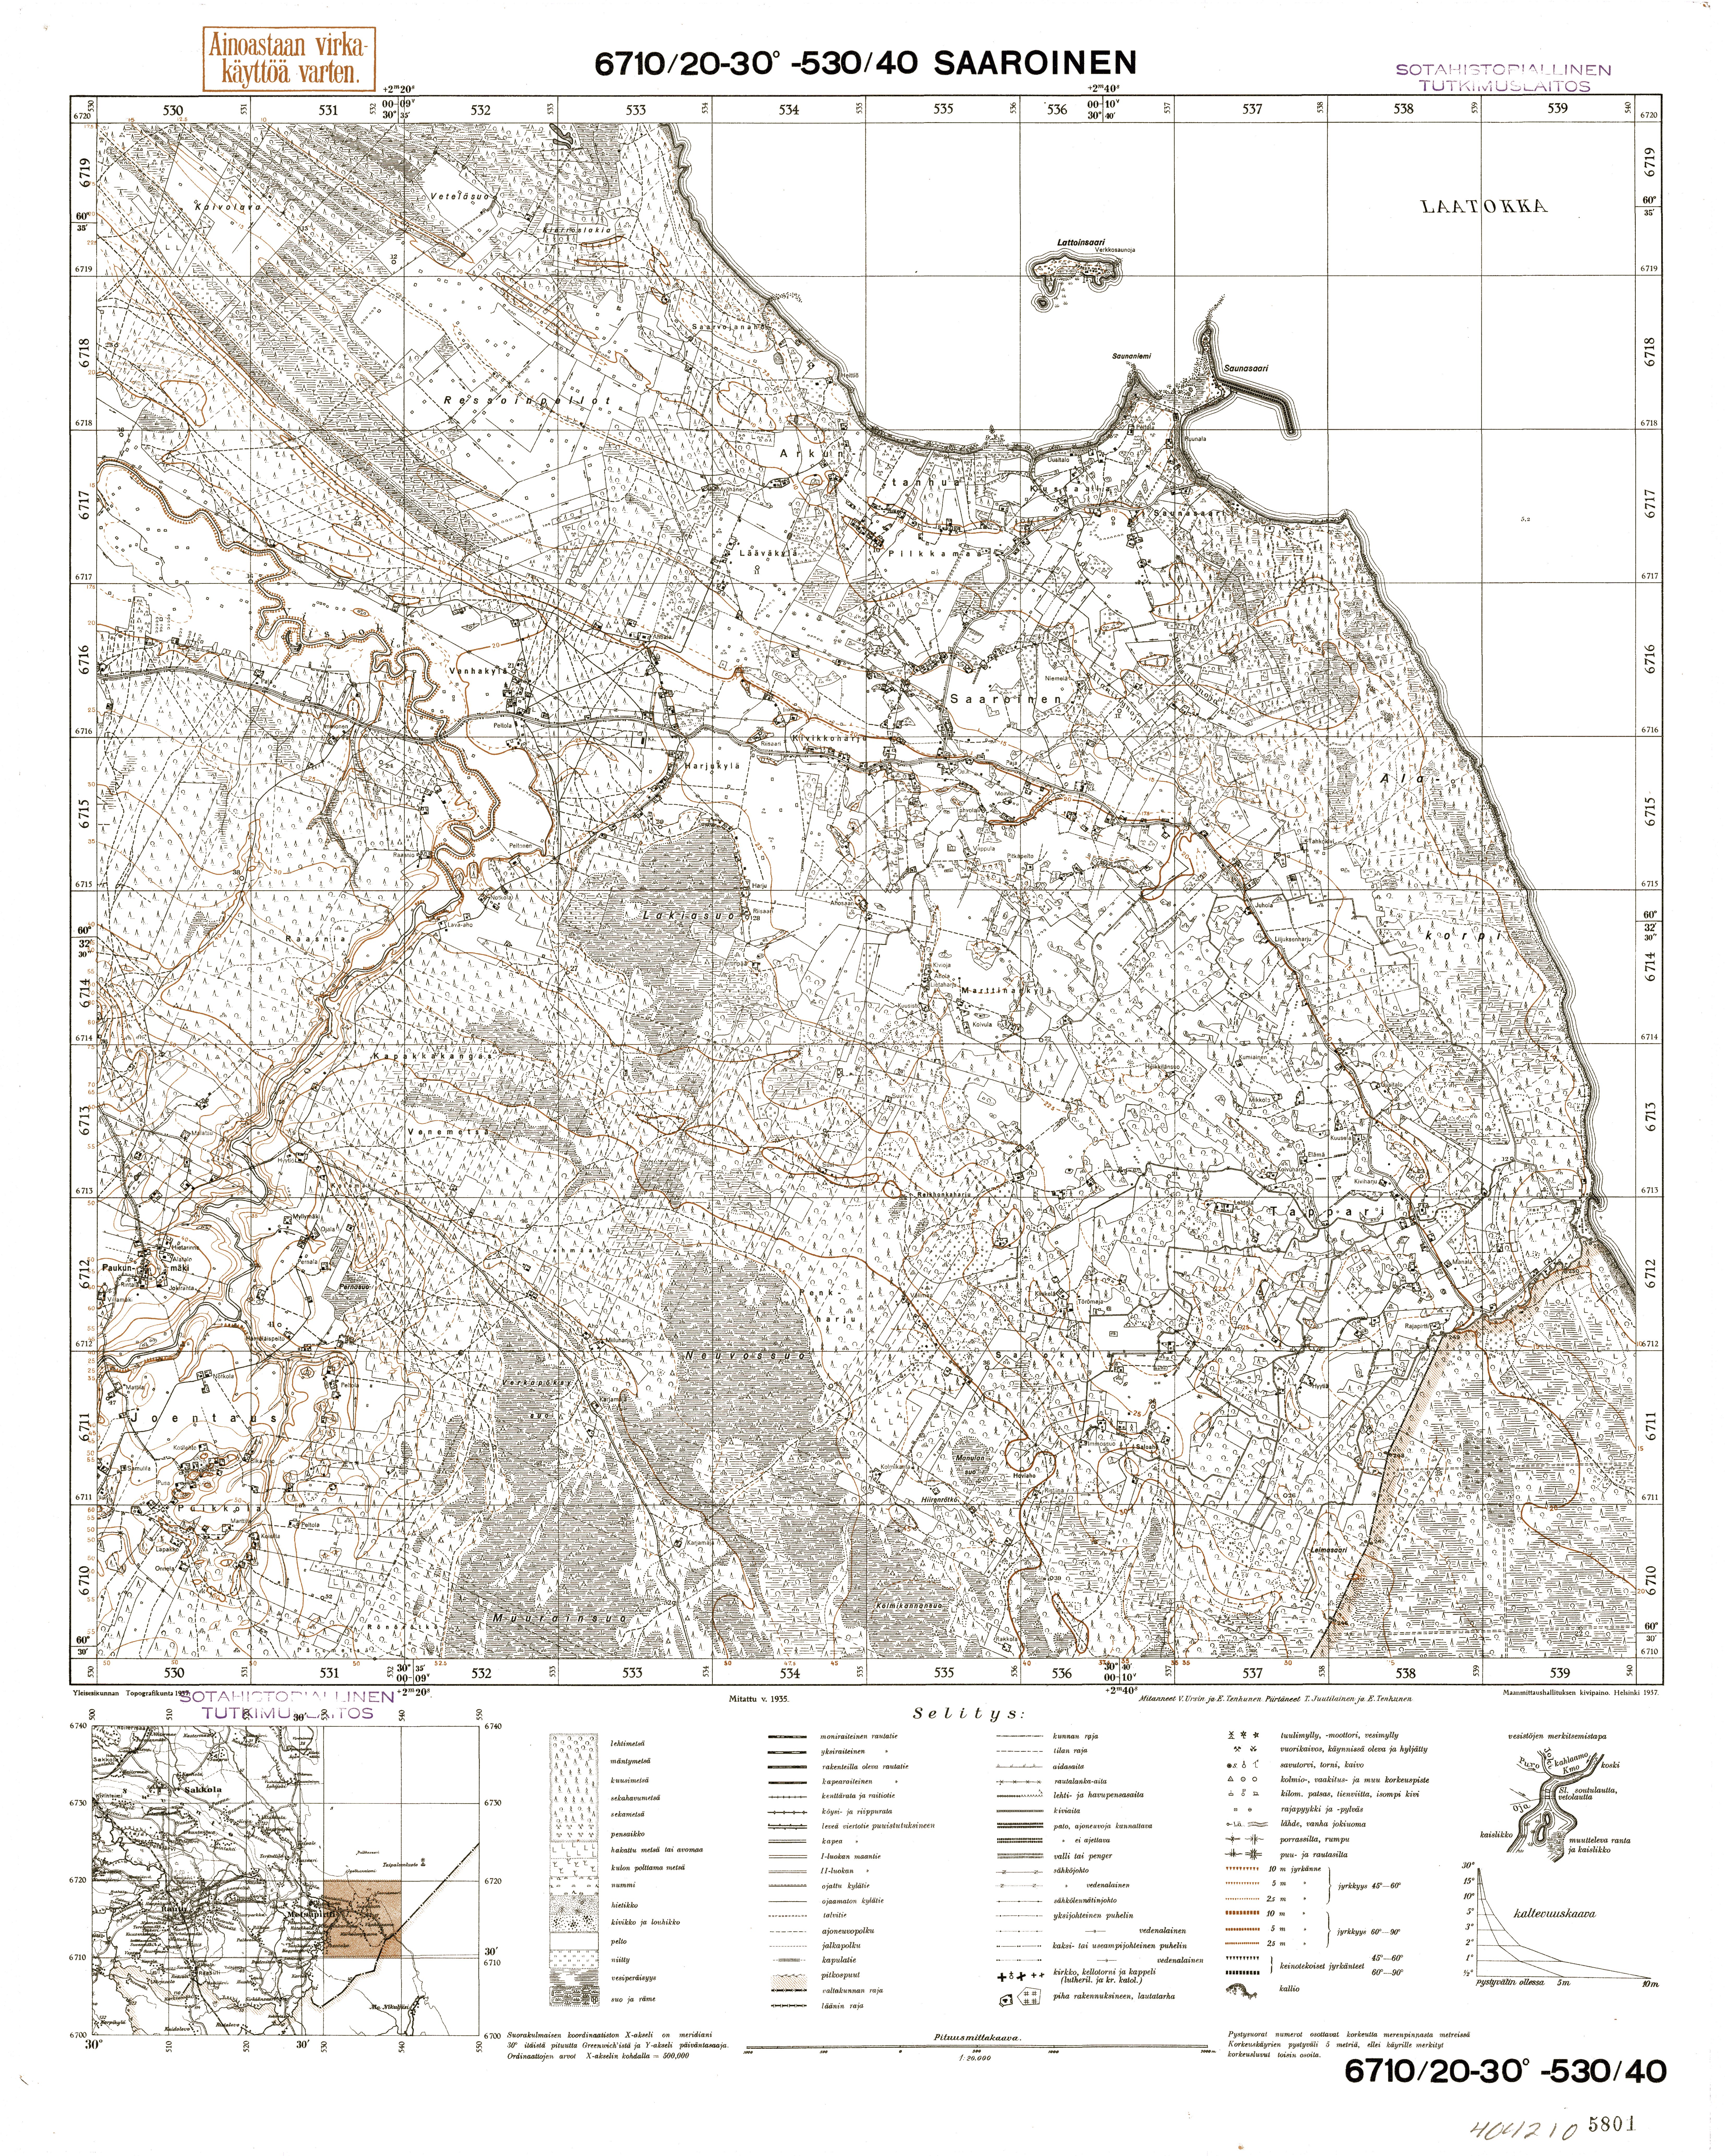 Gravijnoe Village Site. Saaroinen. Topografikartta 404210. Topographic map from 1938. Use the zooming tool to explore in higher level of detail. Obtain as a quality print or high resolution image